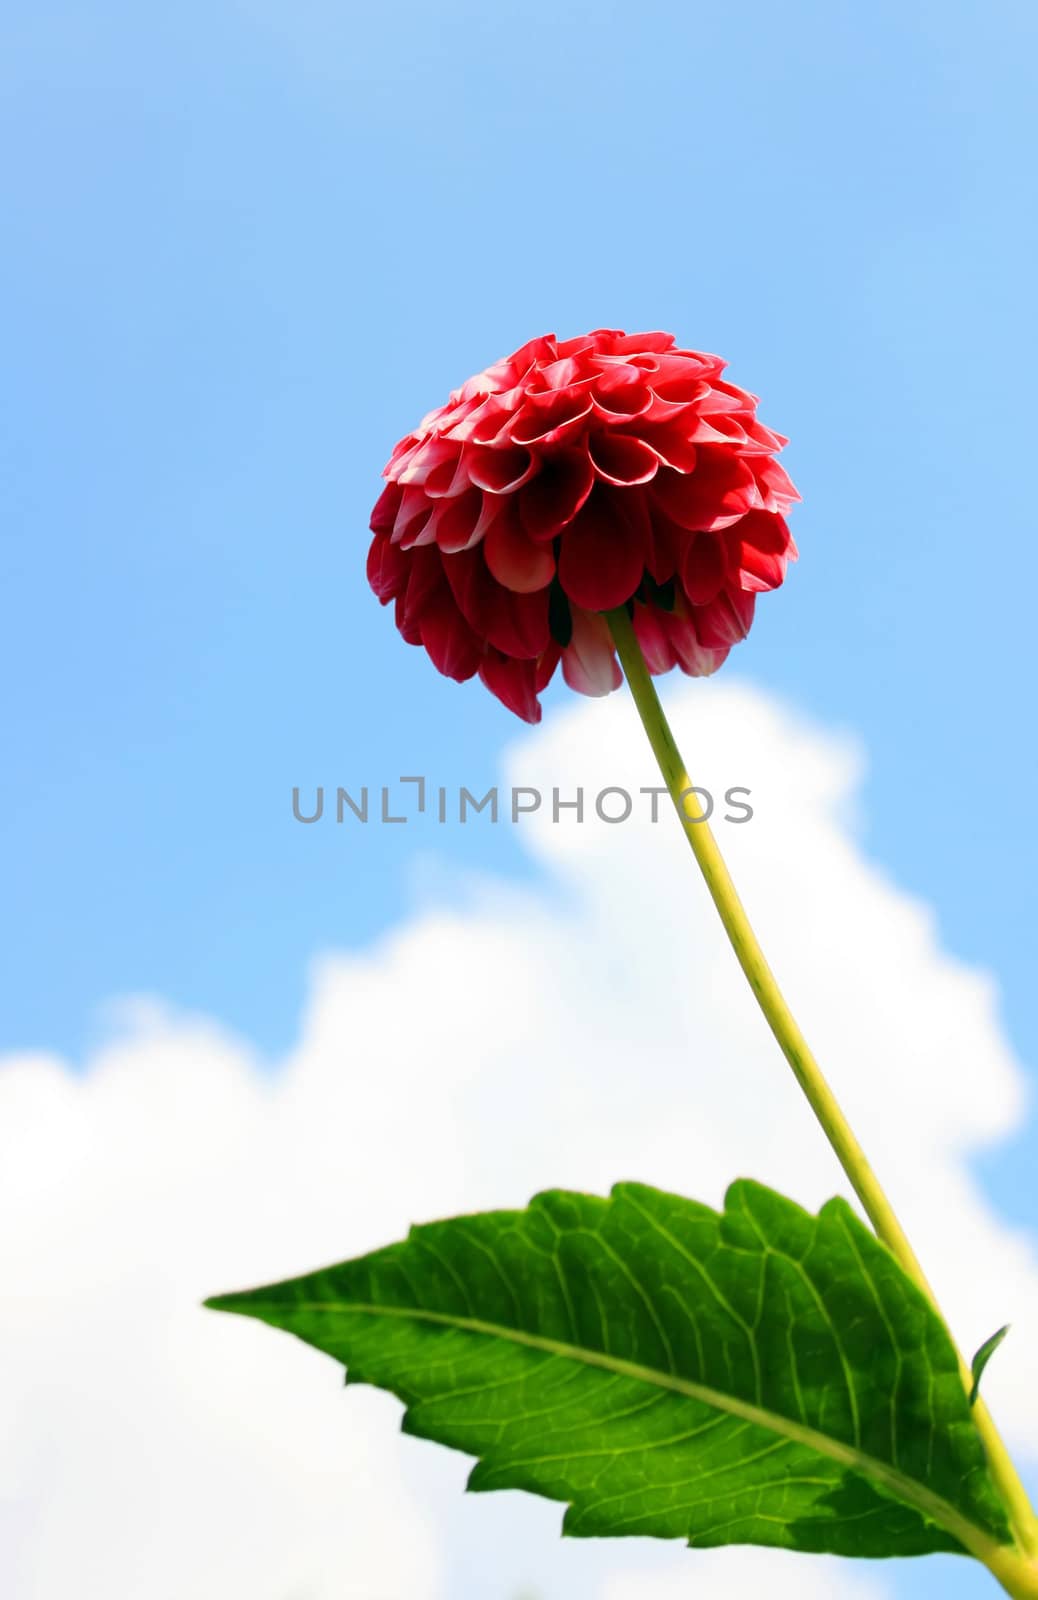 This image shows a red dahlia with cloud